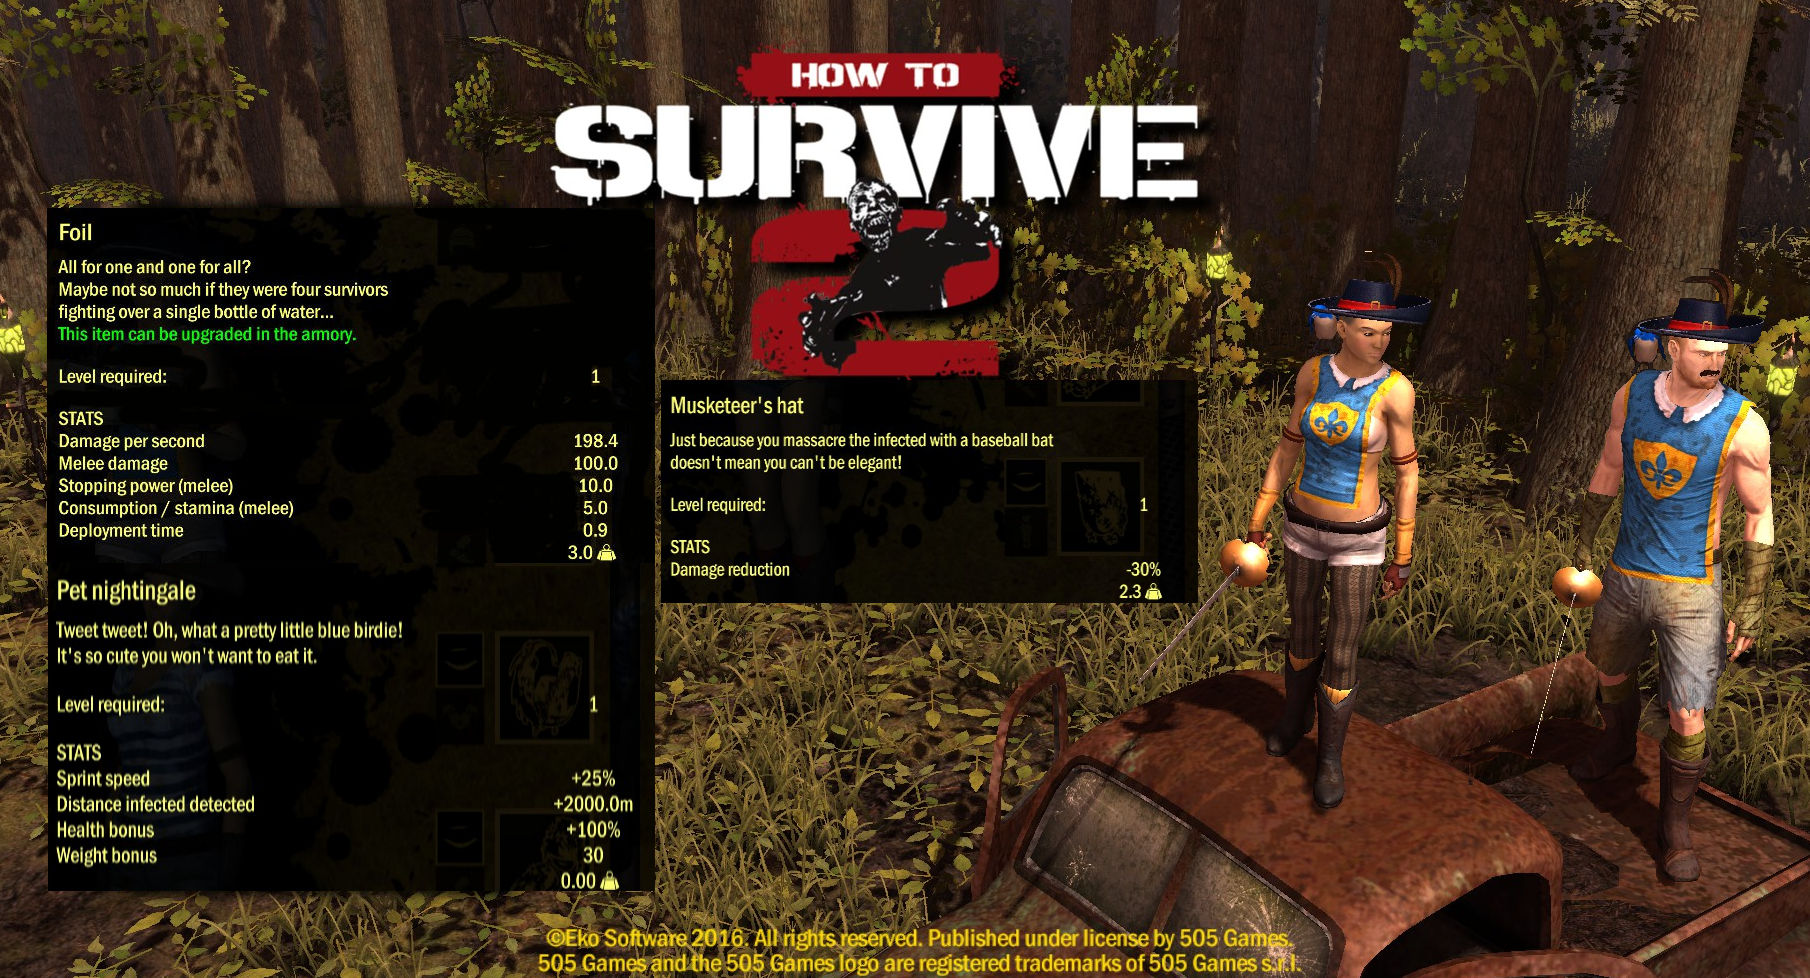 How To Survive 2 - Musketeer Skin Pack Featured Screenshot #1